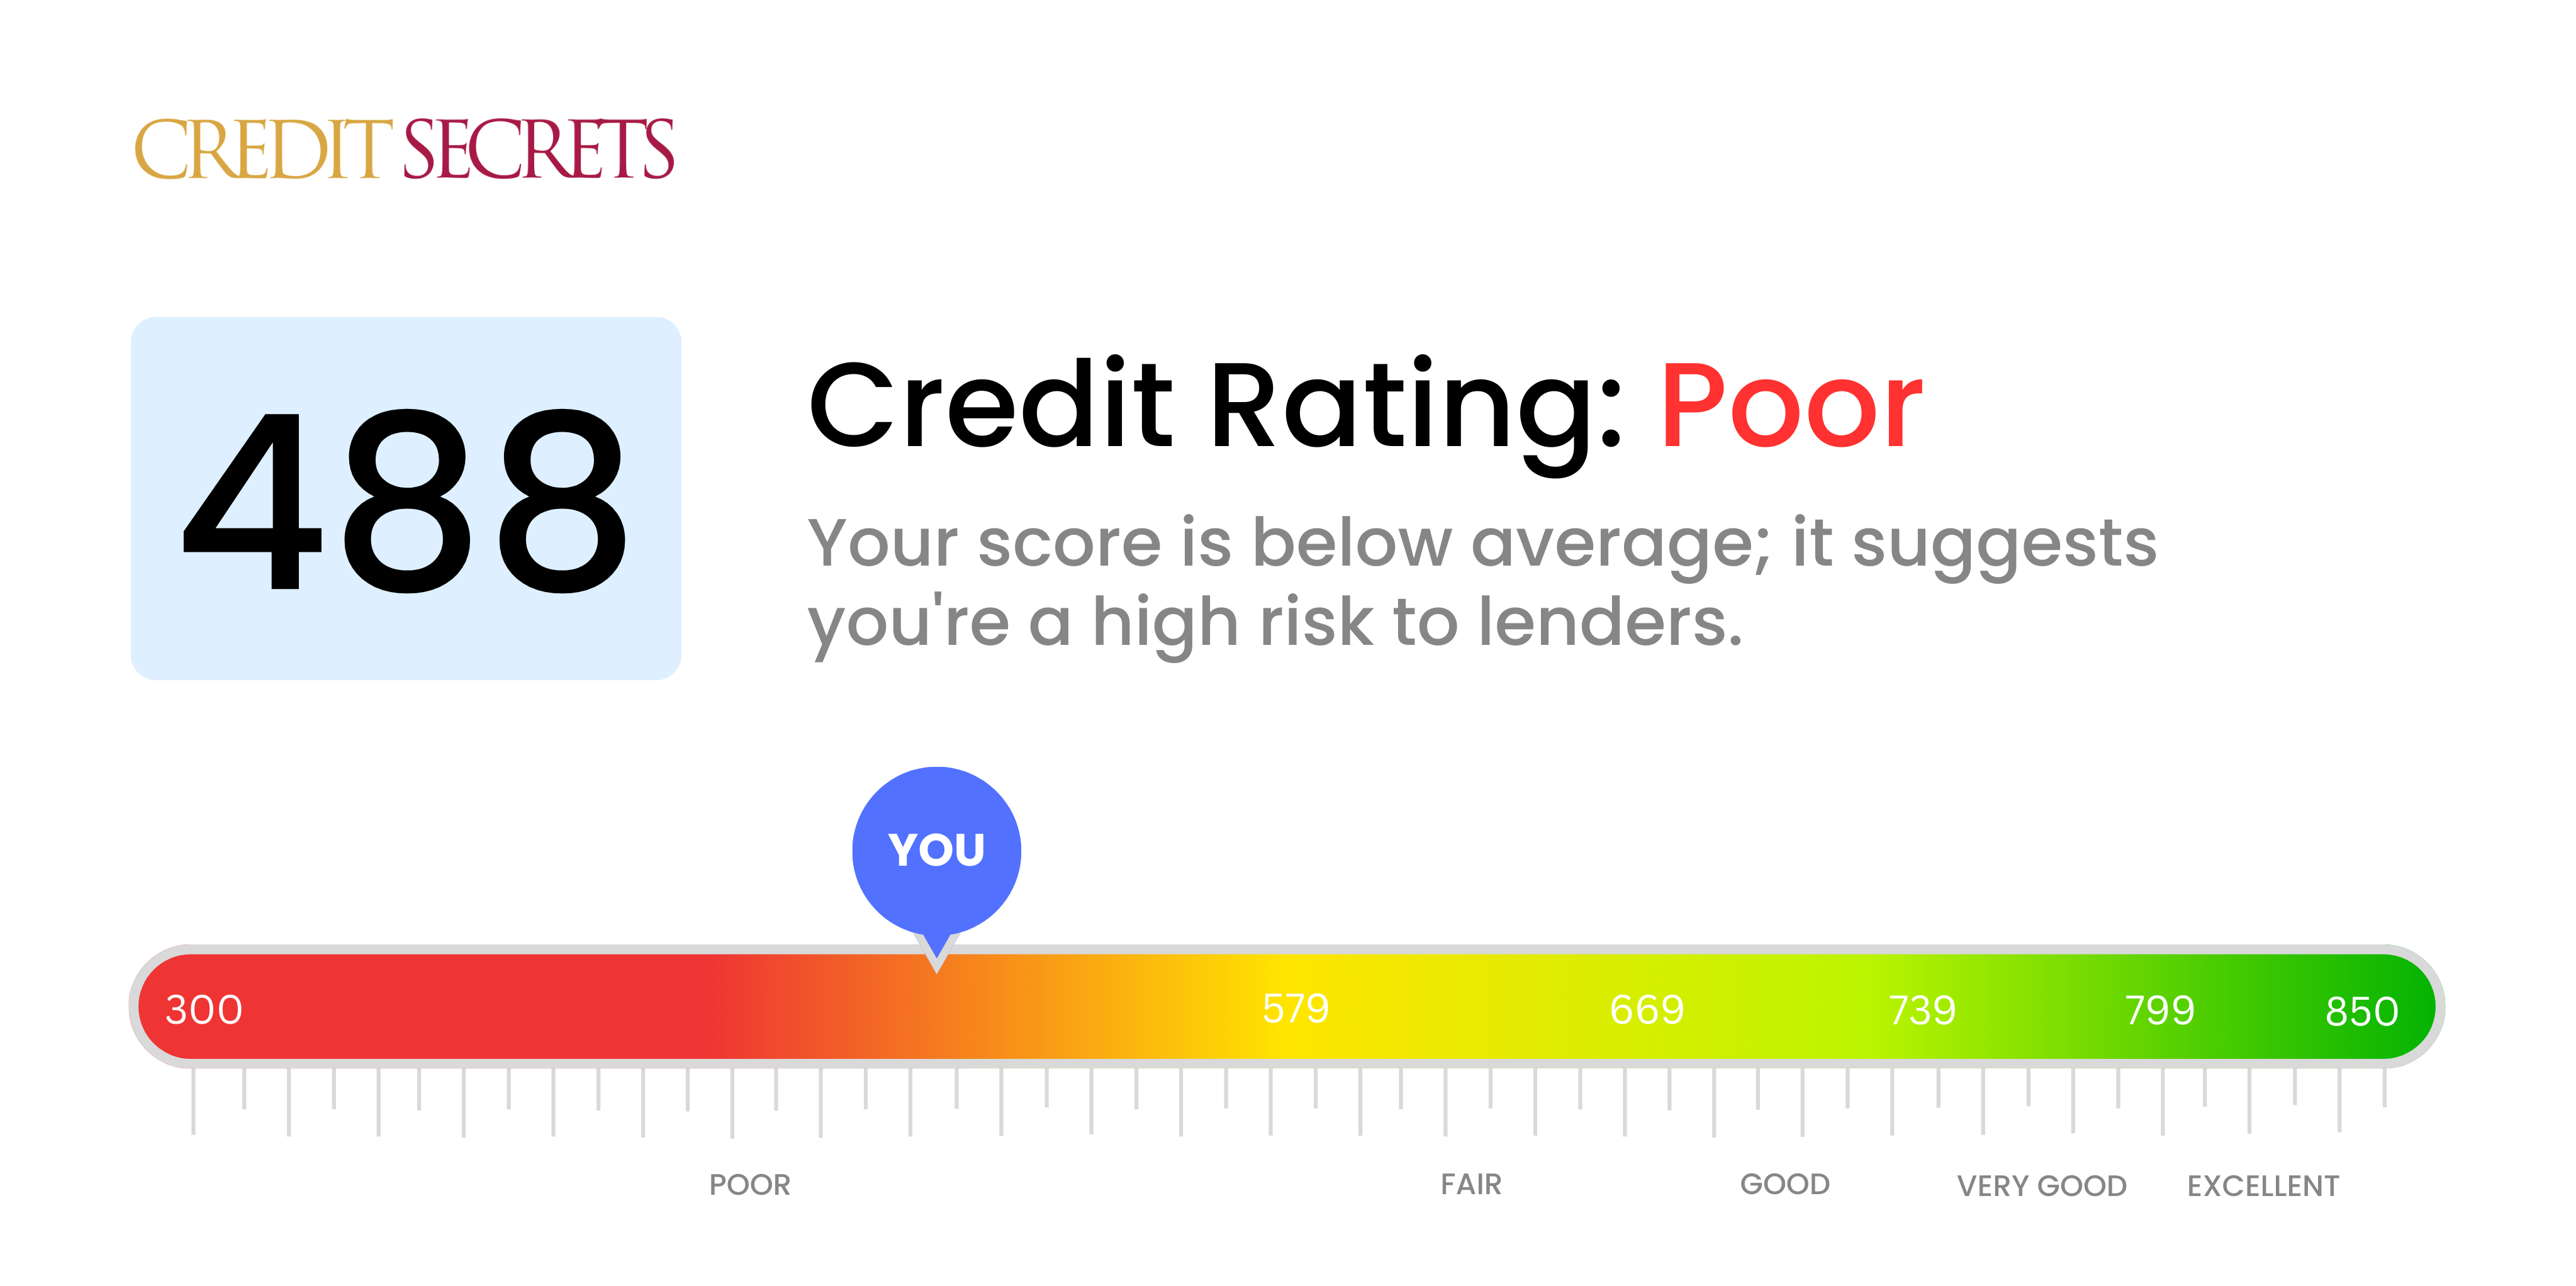 Is 488 a good credit score?